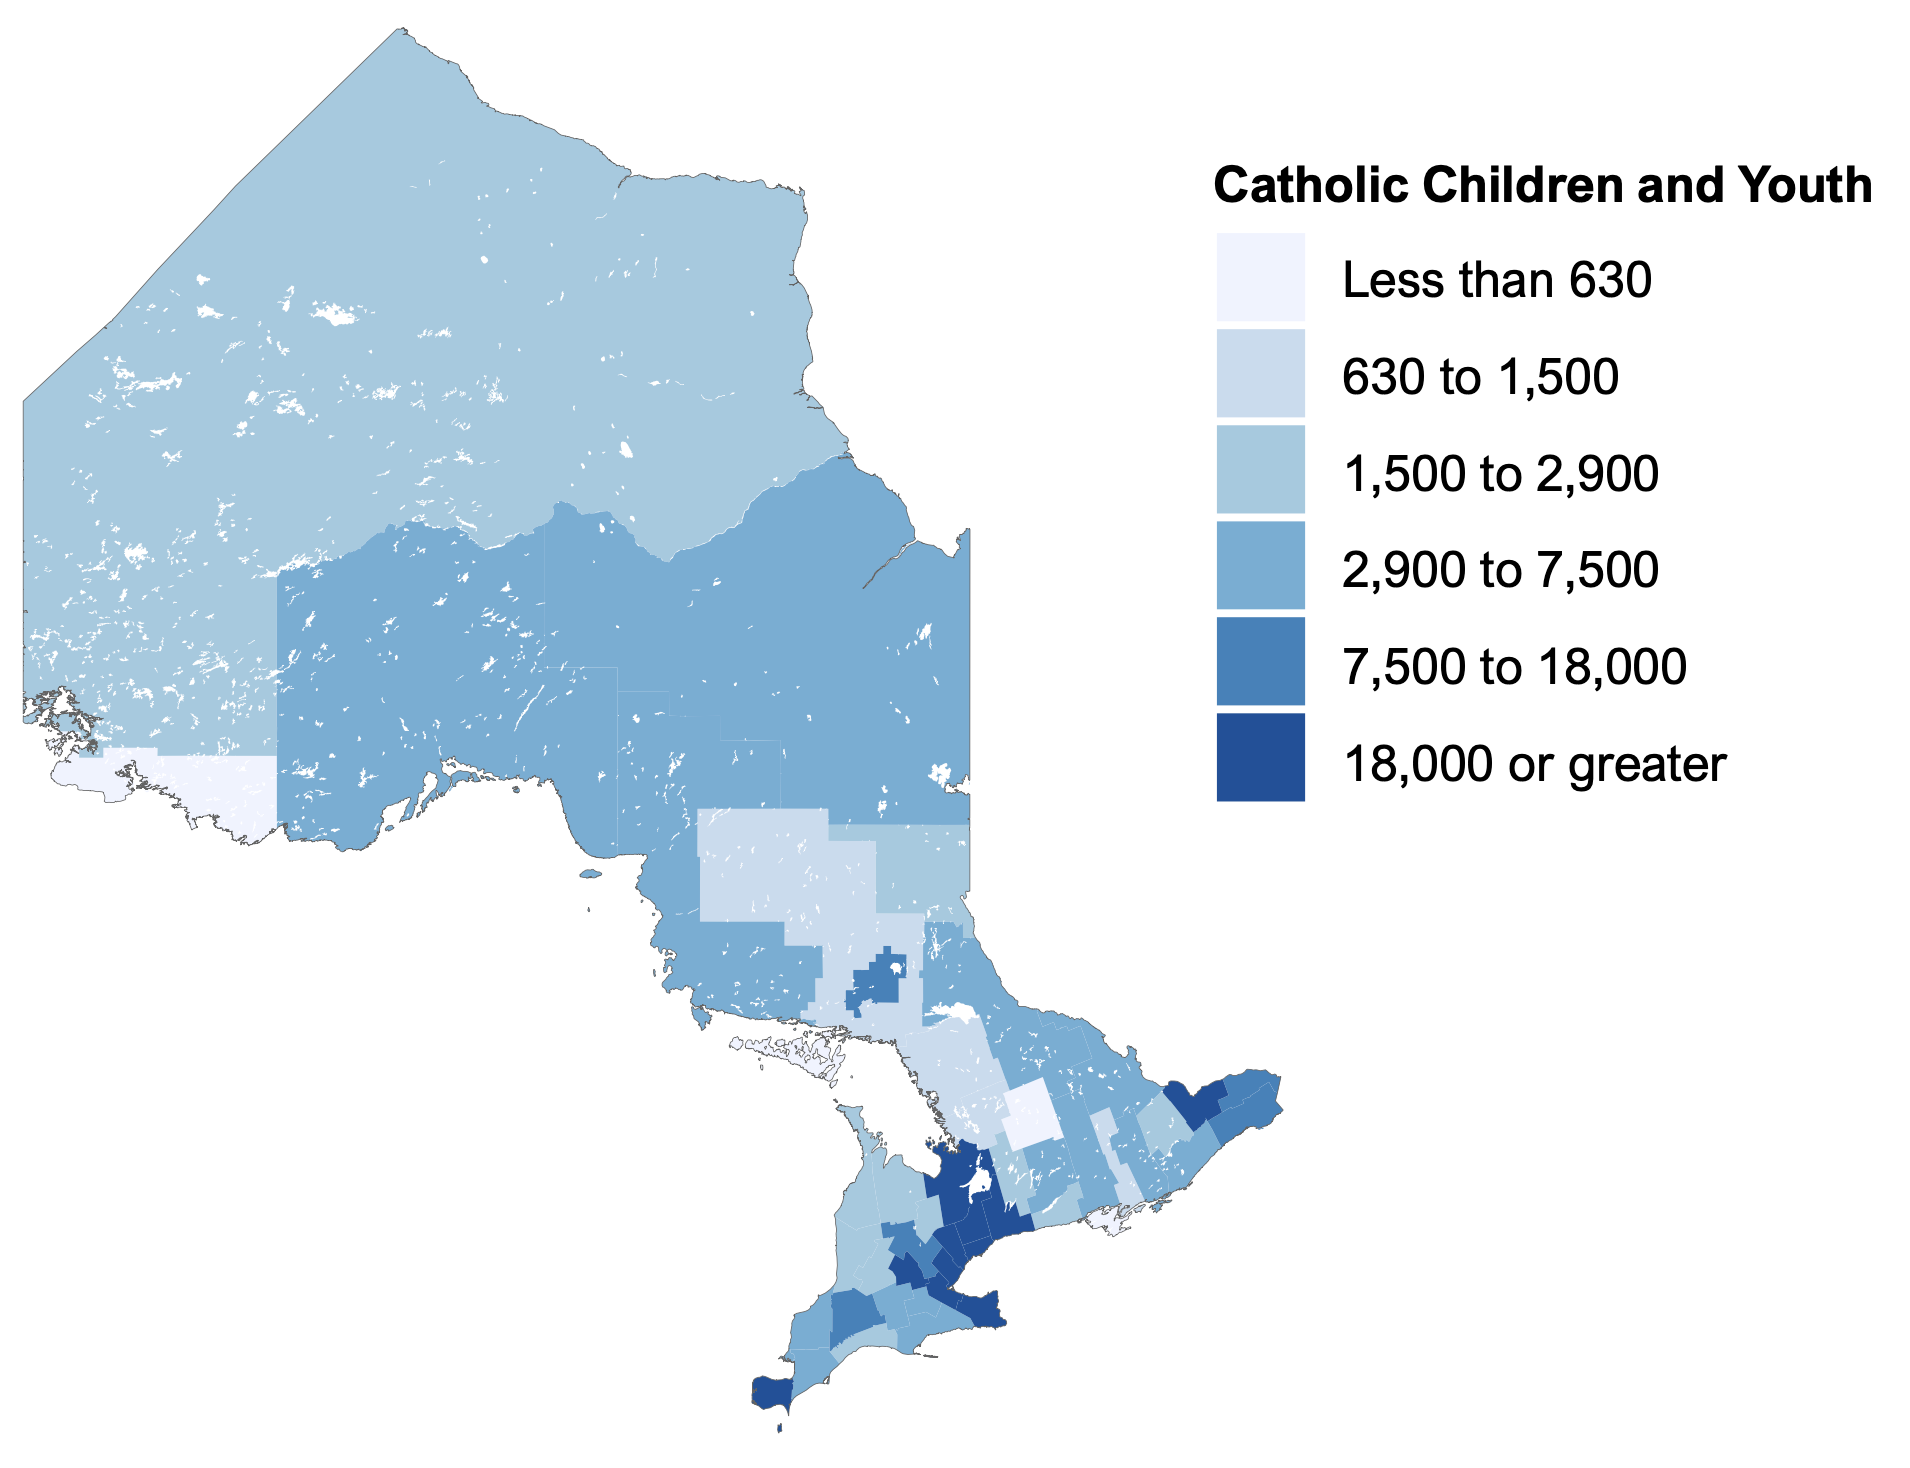 Figure 3.6 shows the number of school-aged children and youth who identify as Catholic or have at least one Catholic parent in each of Ontario’s 49 census divisions. The regions with the highest concentration of school-aged children and youth who identified as Catholic or had at least one Catholic parent were the GTHA, Ottawa, Essex, Waterloo and Simcoe.